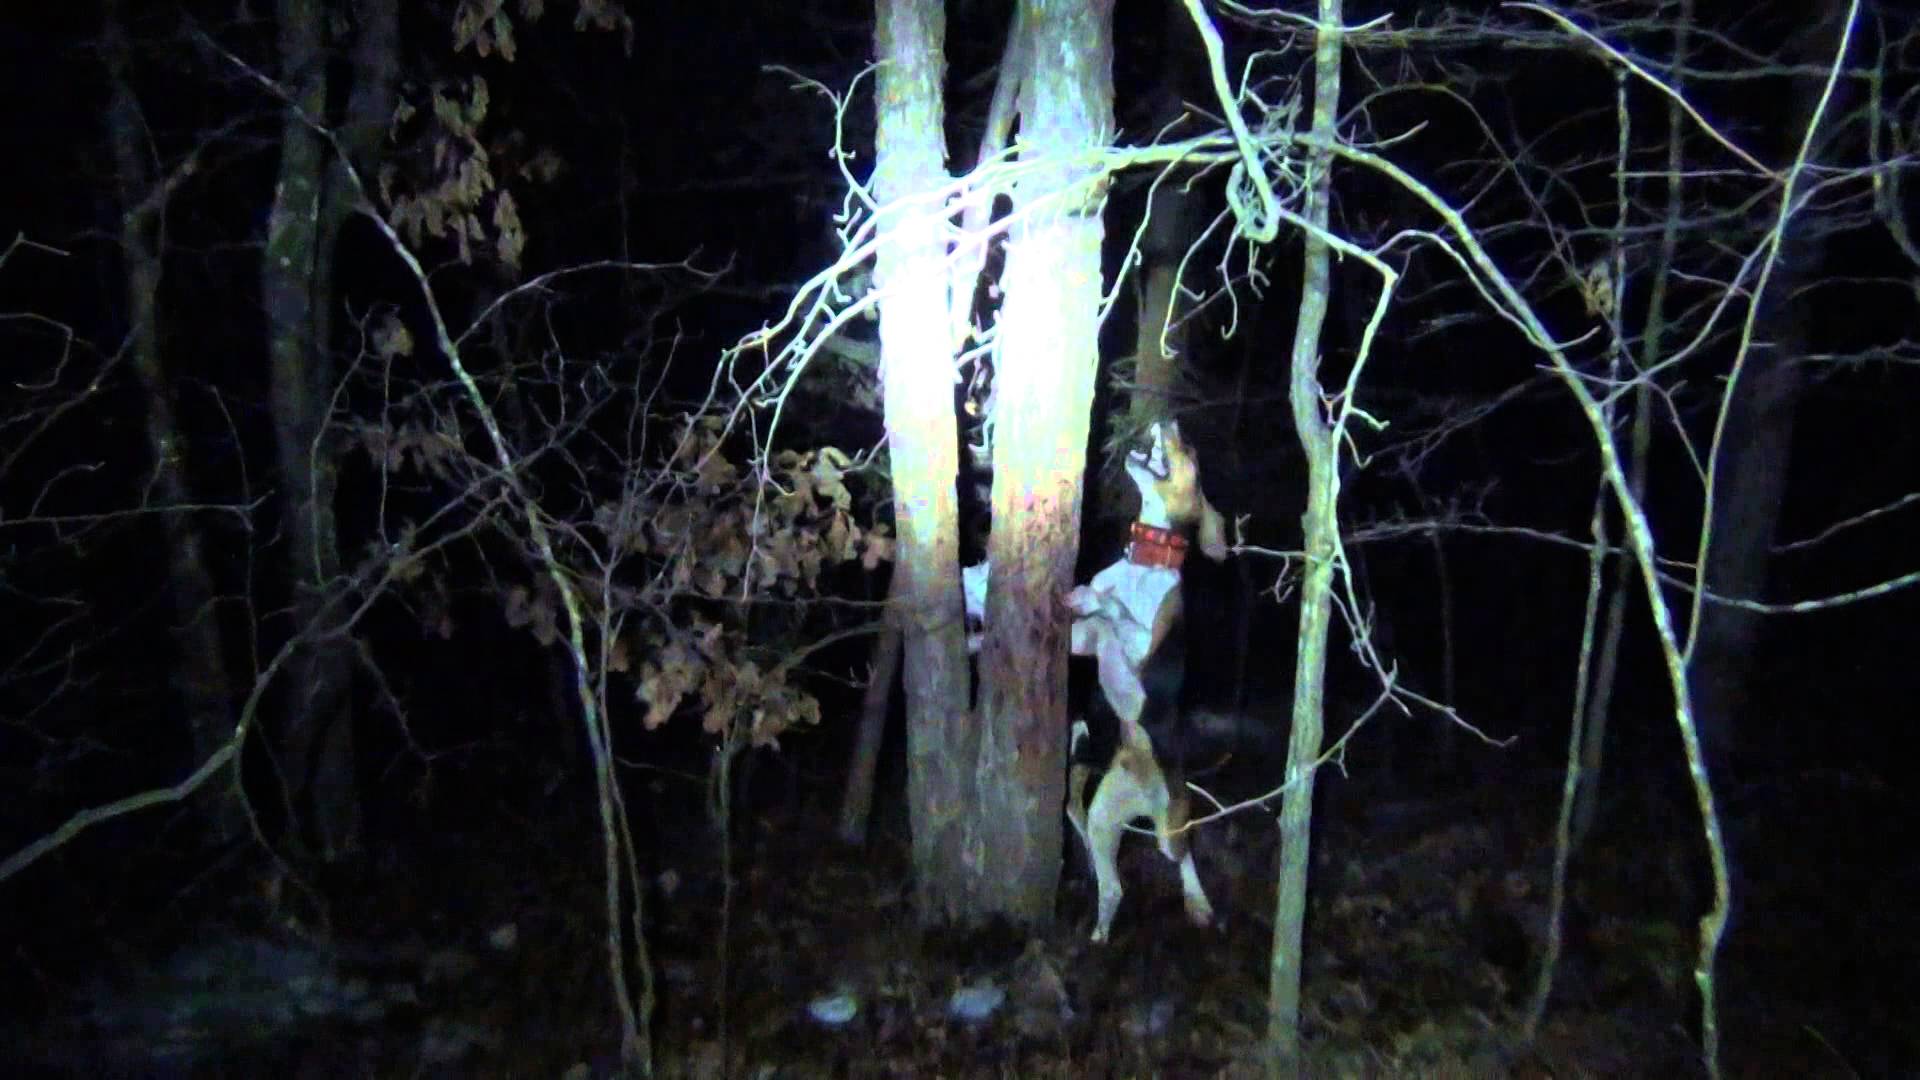 Zeb 3 pup and Nitech Sackett treed in snow - YouTube